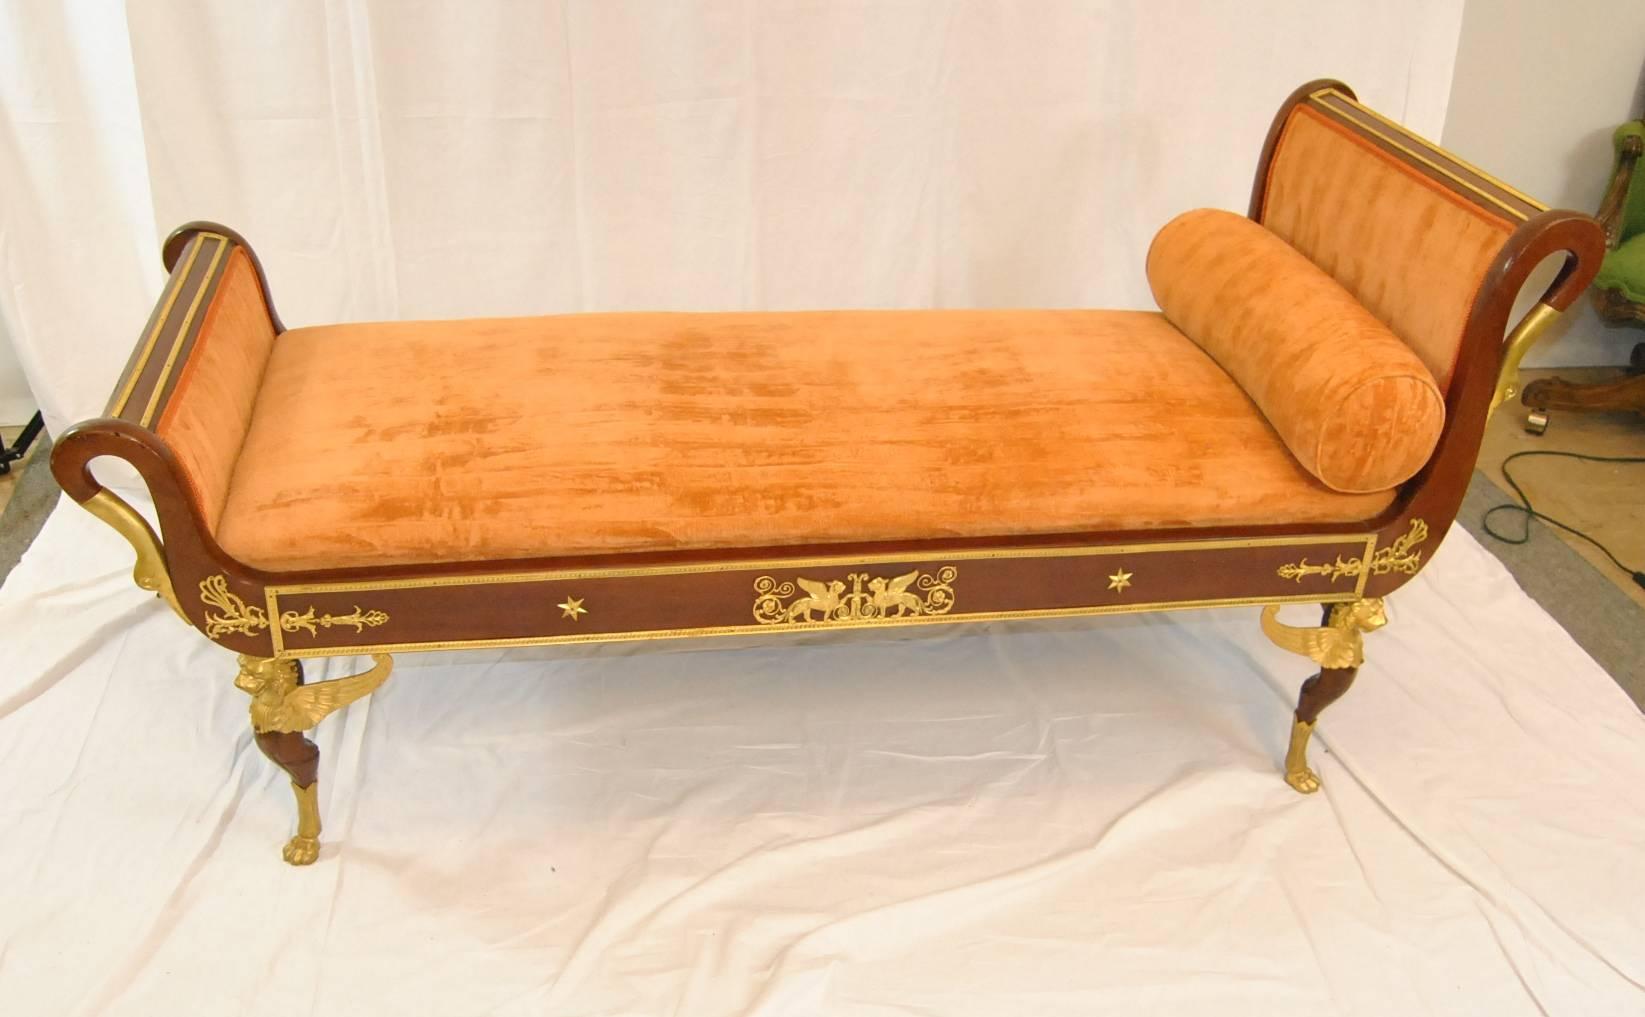 A beautiful French Empire style recamier day bed.  The rich mahogany frame features outswept sides which end in bronze swan molded figures.  Legs have gilded bronze winged Lions and paw feet.  On the seat frame there are two winged griffins